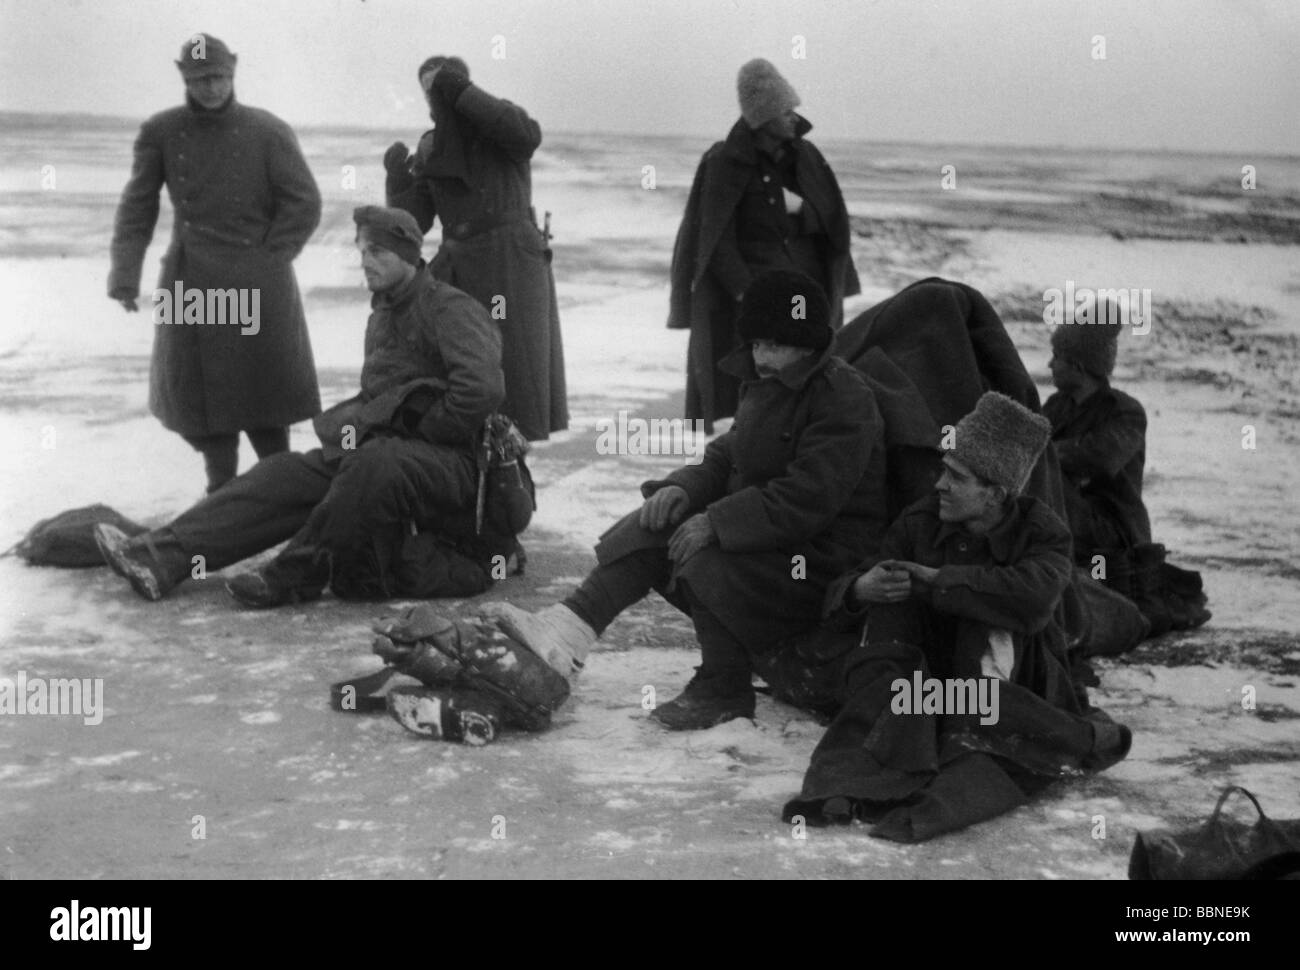 events, Second World War / WWII, Russia 1942 / 1943, Kerch, wounded Rumanian soldiers waiting for their evacuation, 6.2.1943, Crimea, Romanian, Ukraine, Rumanians, Romanians, 20th century, historic, historical, winter clothing, clothes, uniform, uniforms, fur cap, caps, medical service, USSR, Soviet Union, Eastern Front, people, 1940s, Stock Photo